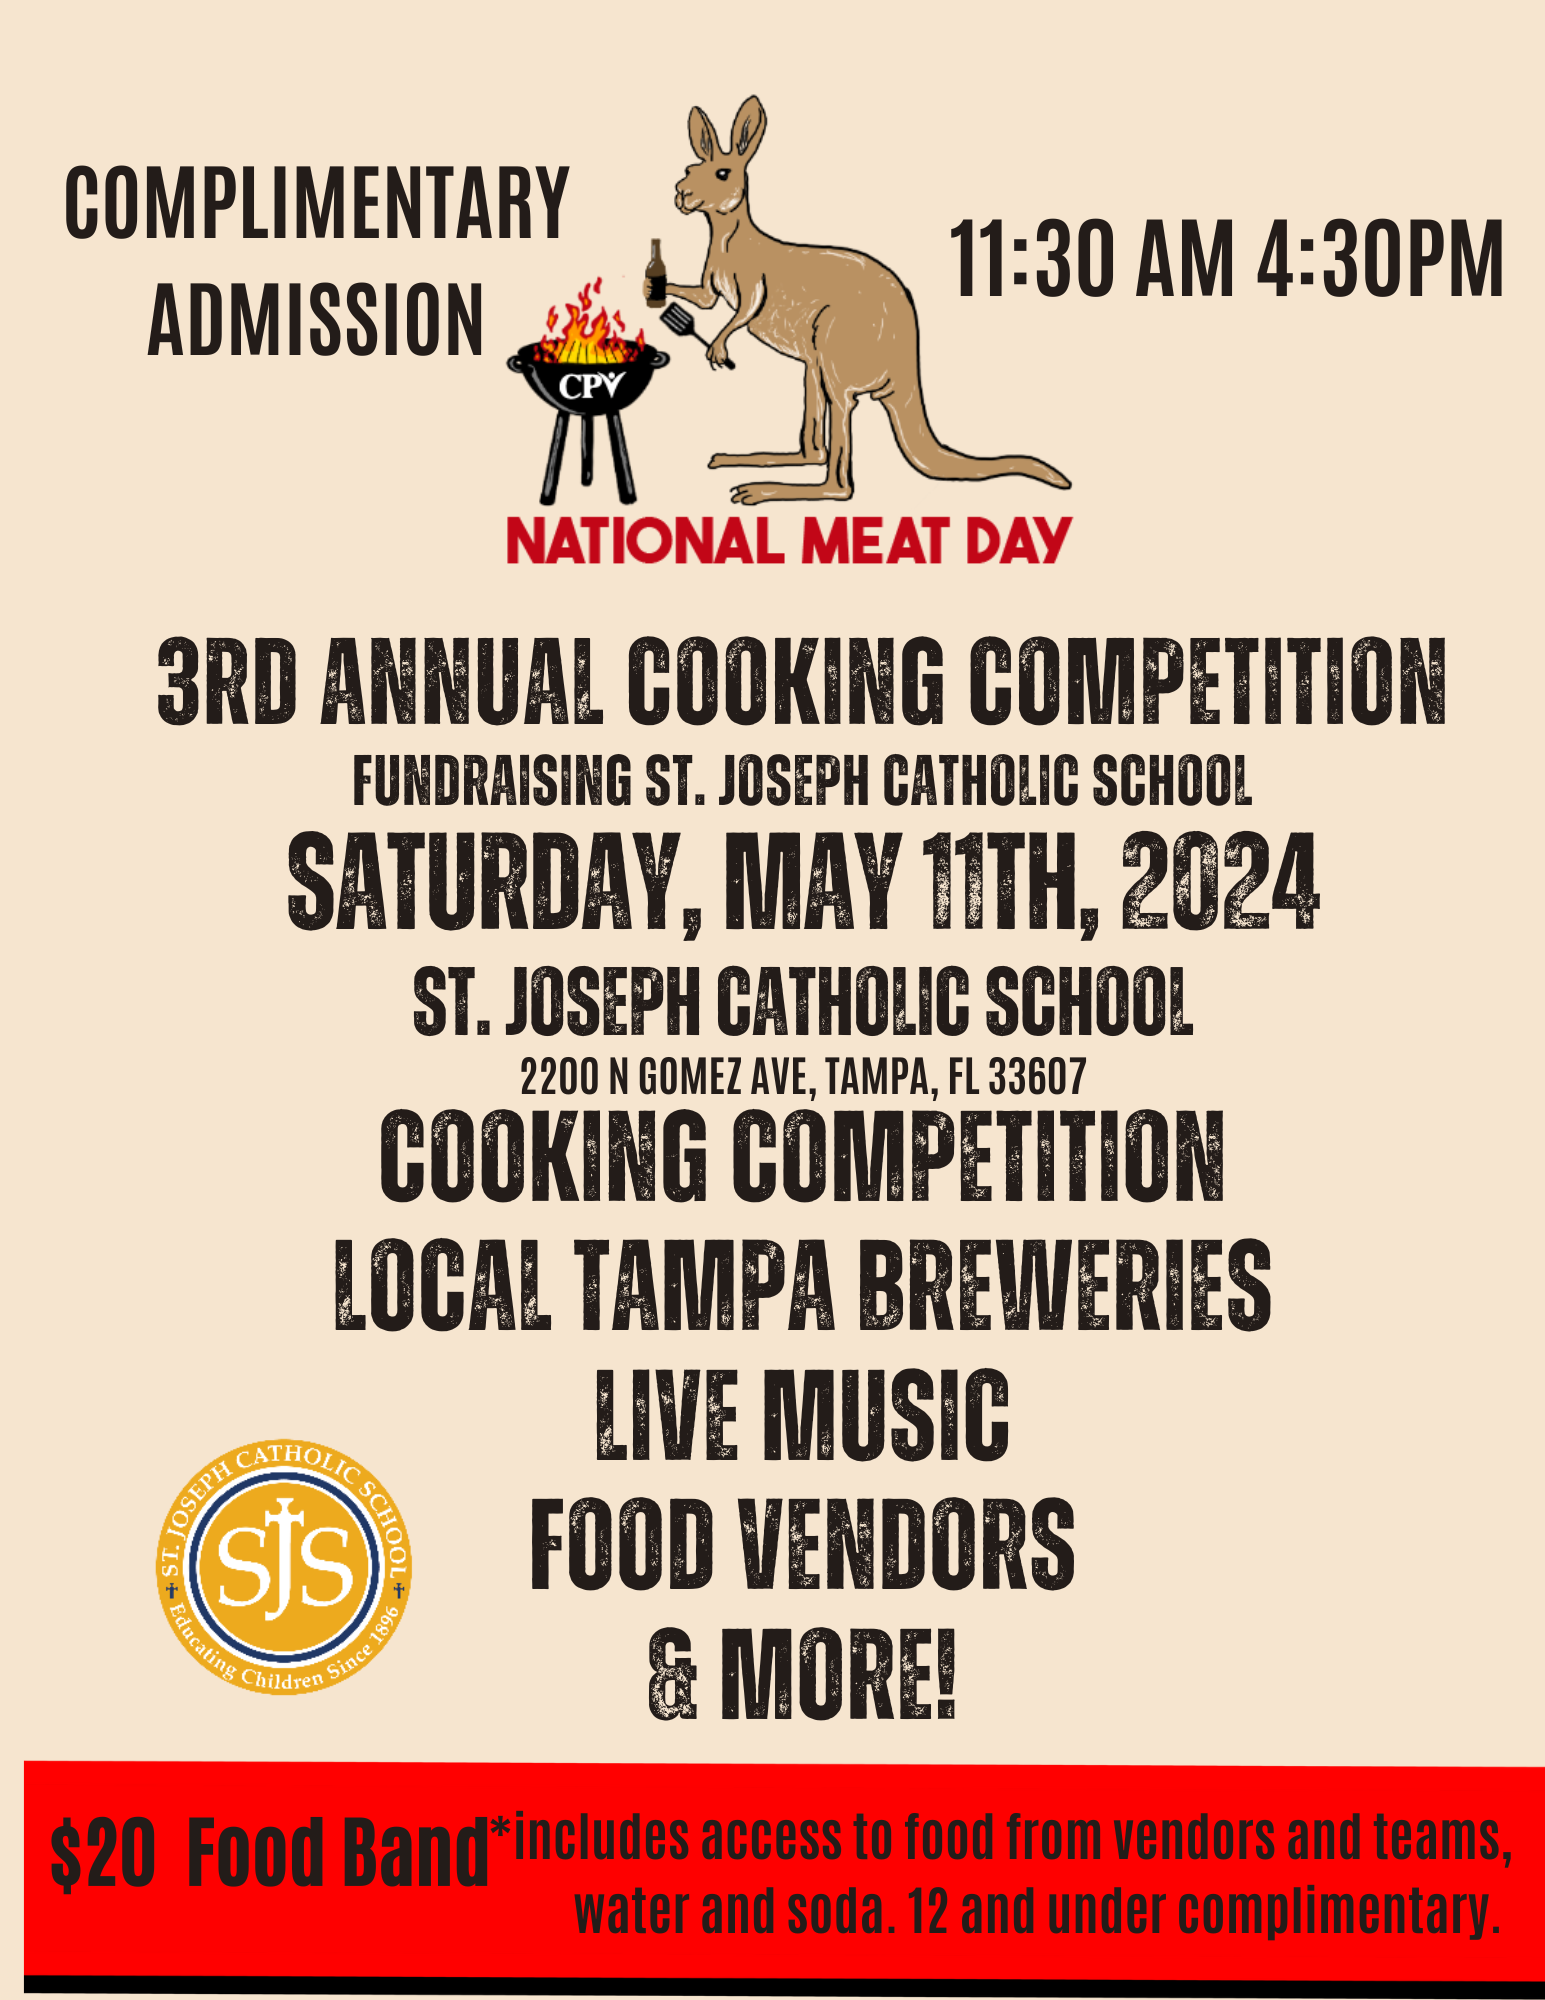 Copy_of_3RD_ANNUAL_COOKING_COMPETITION_FUNDRAISING_ST._JOSEPH_CATHOLIC_SCHOOL_SATURDAY_MAY_11TH_2024_ST._JOSEPH_CATHOLIC_SCHOOL_2200_N_GOMEZ_AVE_TAMPA_FL_33607_COOKING_COMPETITION_LOCAL_TAMPA_2.png